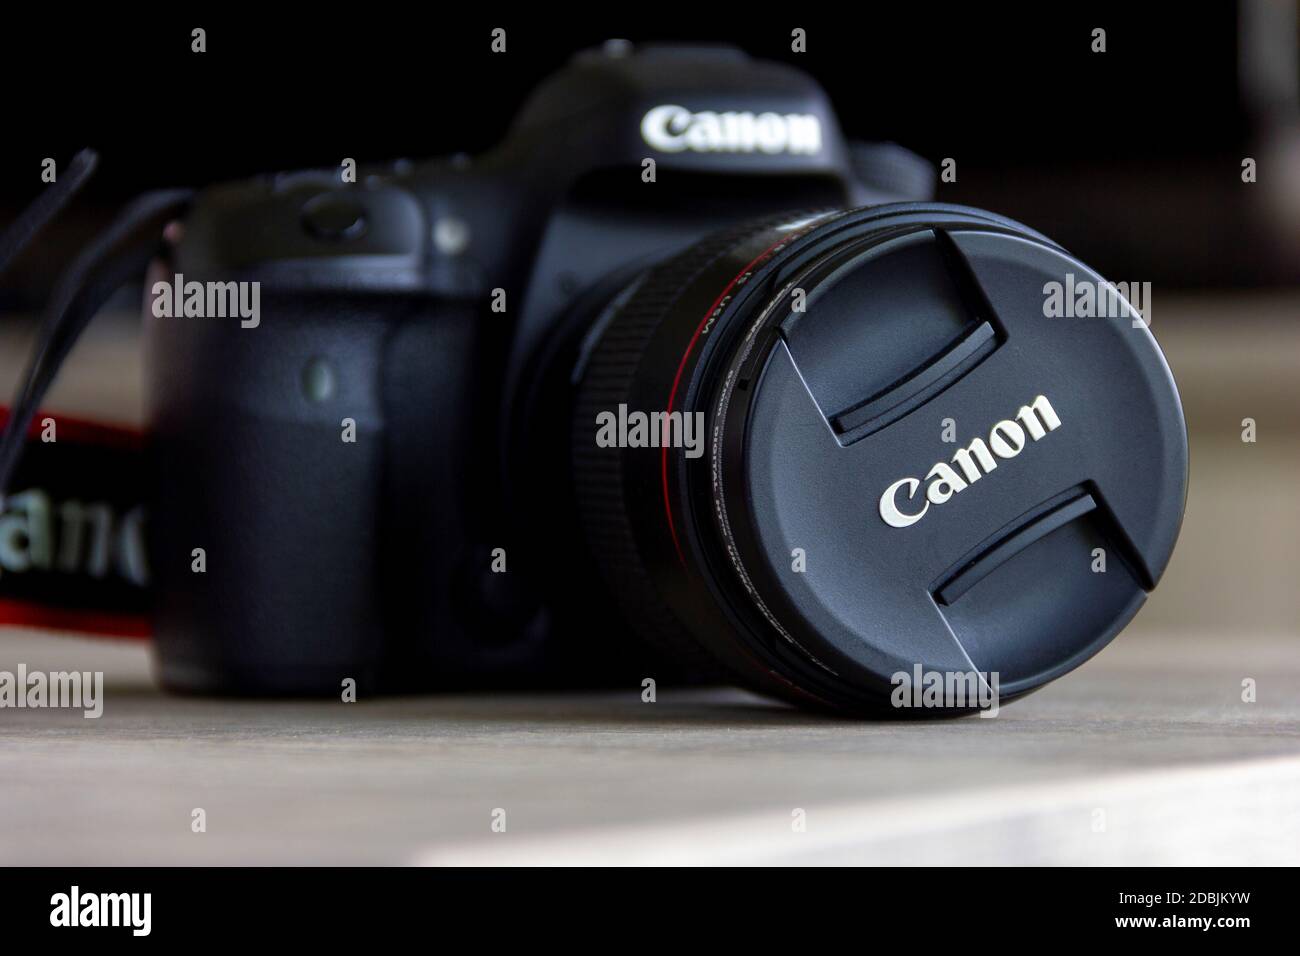 Brecht, Belgium - April 30 2020: A closeup frontal portrait of a canon eos 7D mark II camera lying on a table with an L lens and the lens hood contain Stock Photo